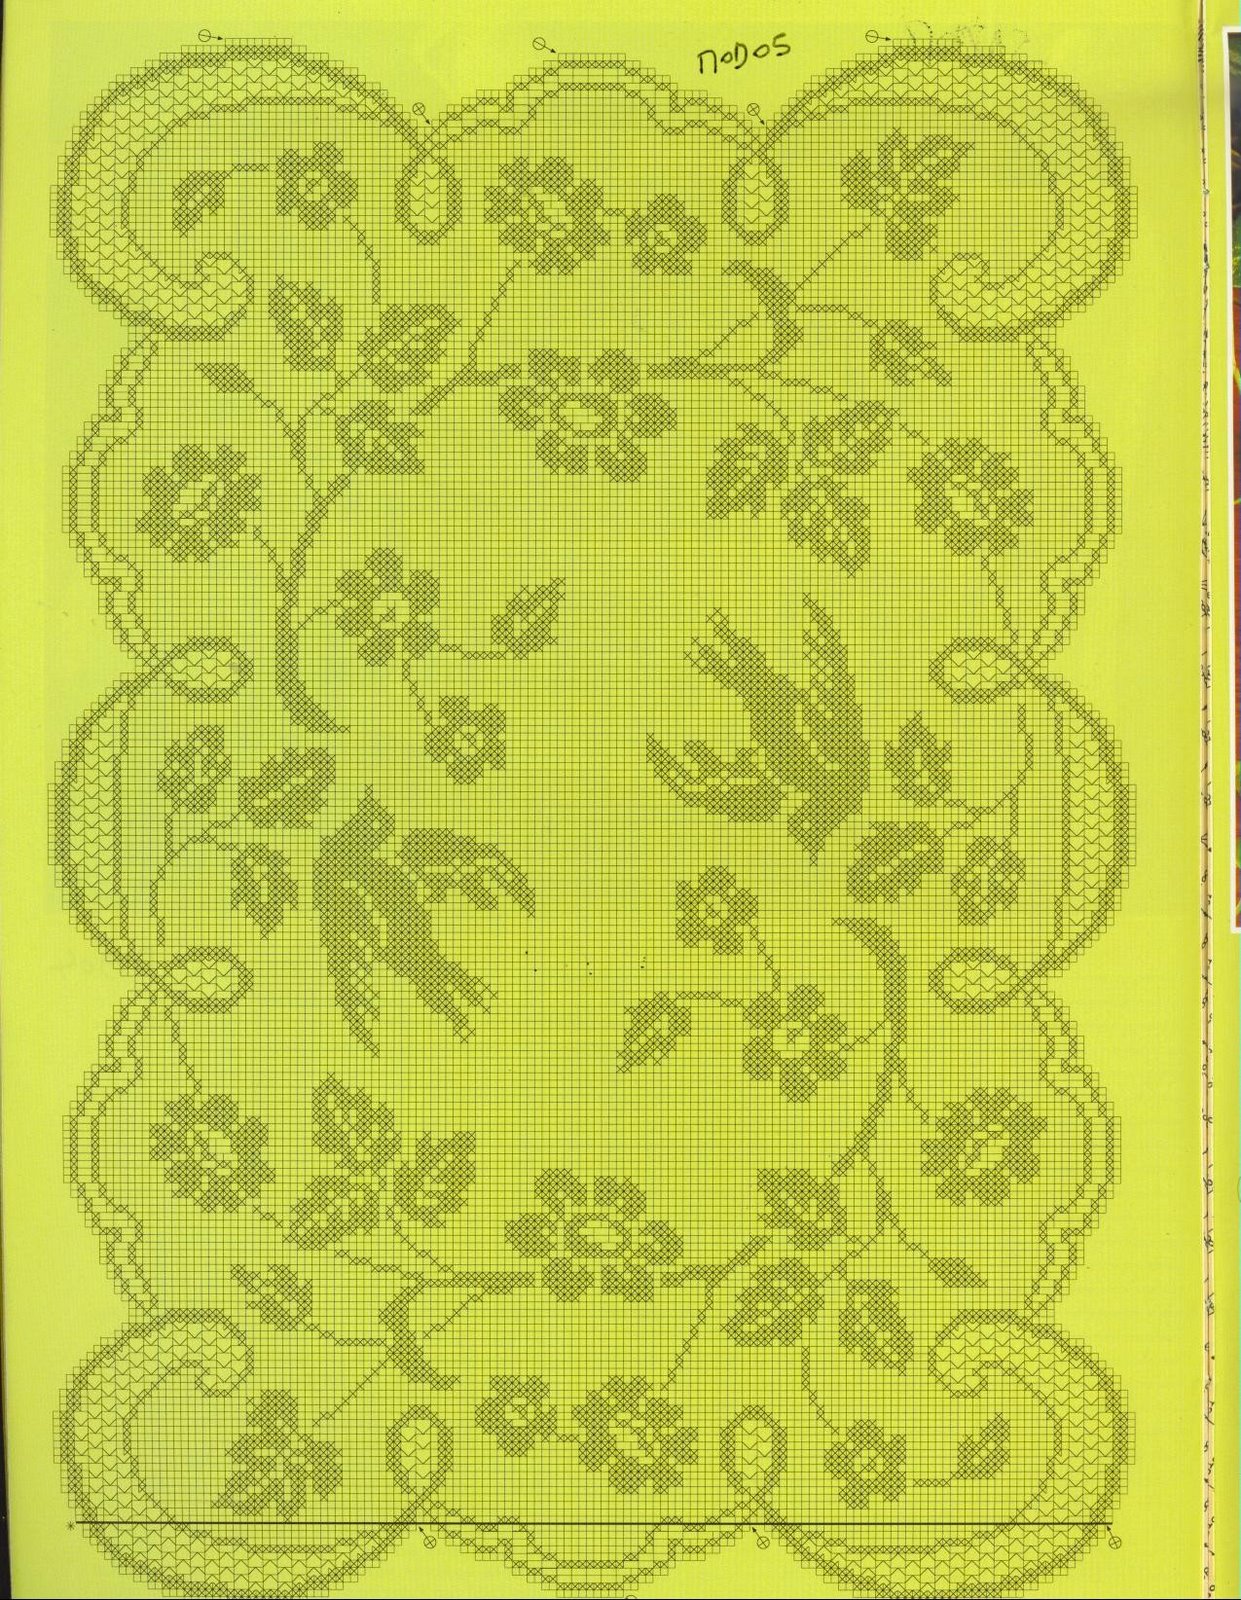 rectangular doily branch of flowers and doves (2)